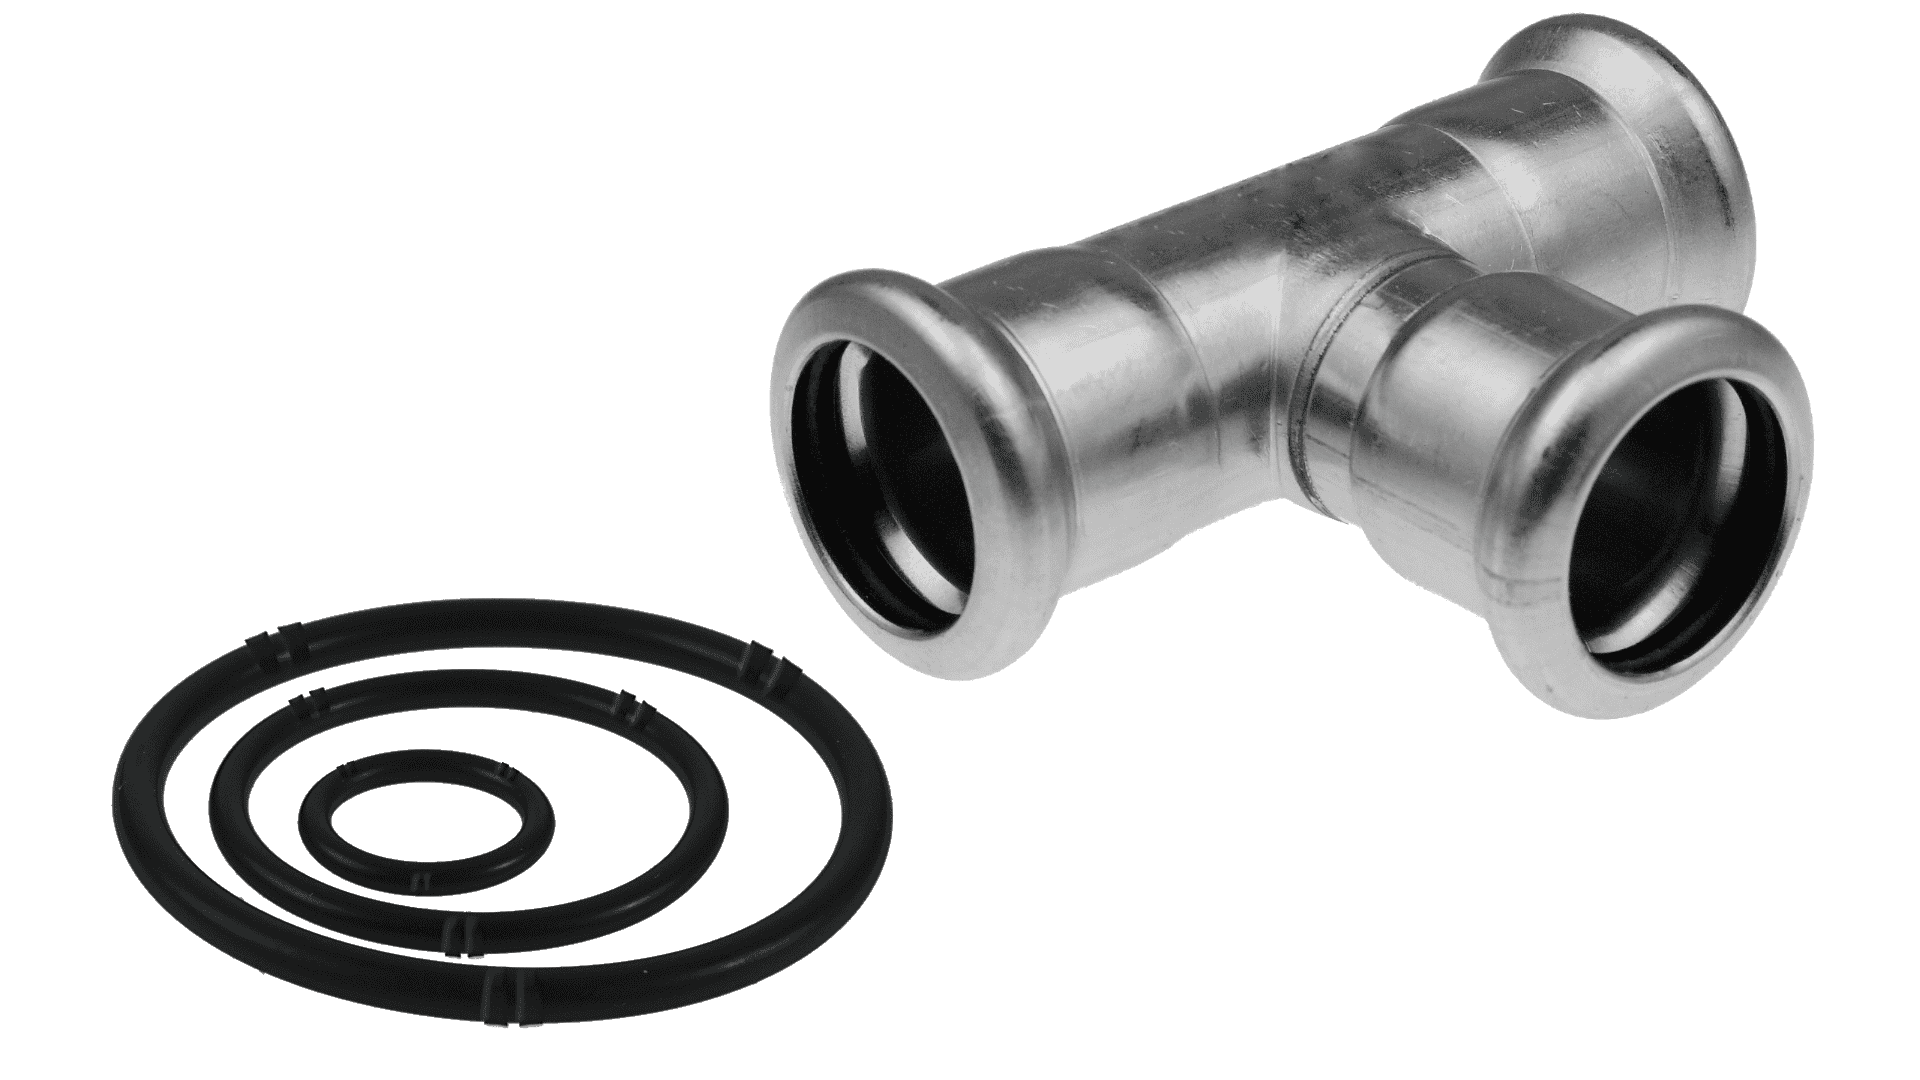 KAN-therm - Sprinkler Inox System - Connections of fittings to pipes remain tight due to high quality ethylene propylene rubber O-rings and three-point clamp profile "M"